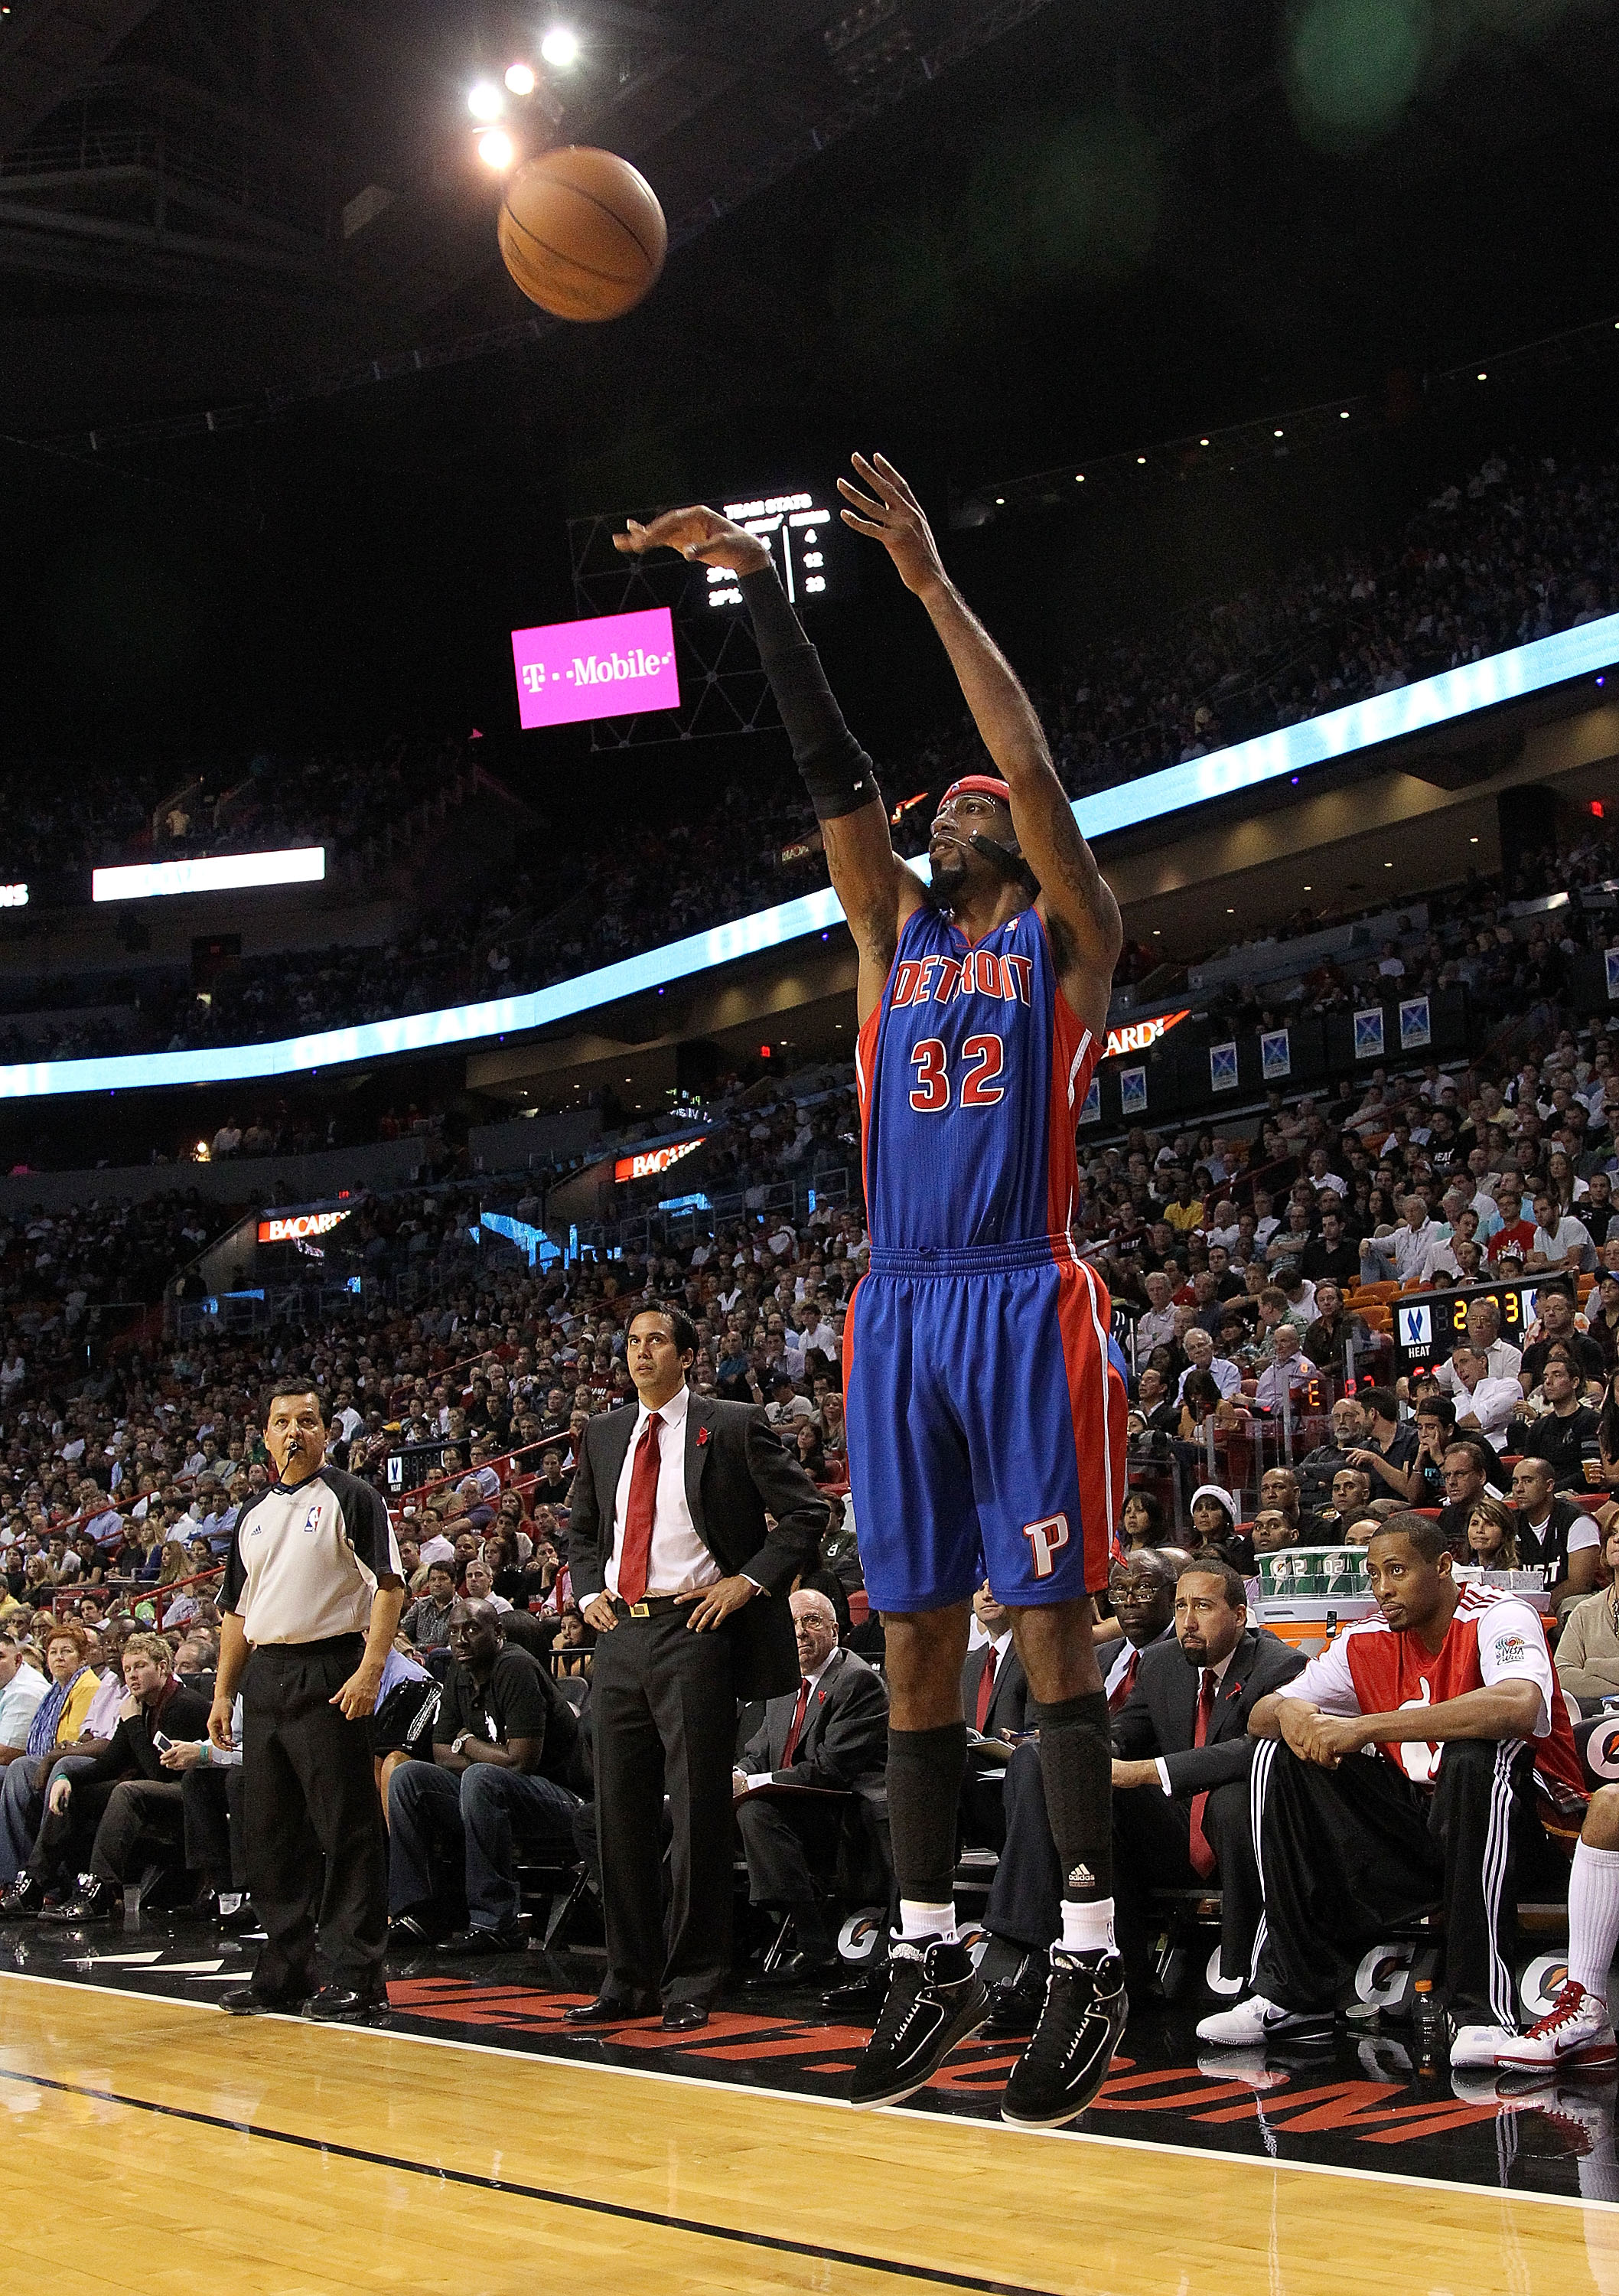 MIAMI, FL - DECEMBER 01: Richard Hamilton #32 of the Detroit Pistons shoots a jumpshot  during a game against the Miami Heat at American Airlines Arena on December 1, 2010 in Miami, Florida. NOTE TO USER: User expressly acknowledges and agrees that, by do